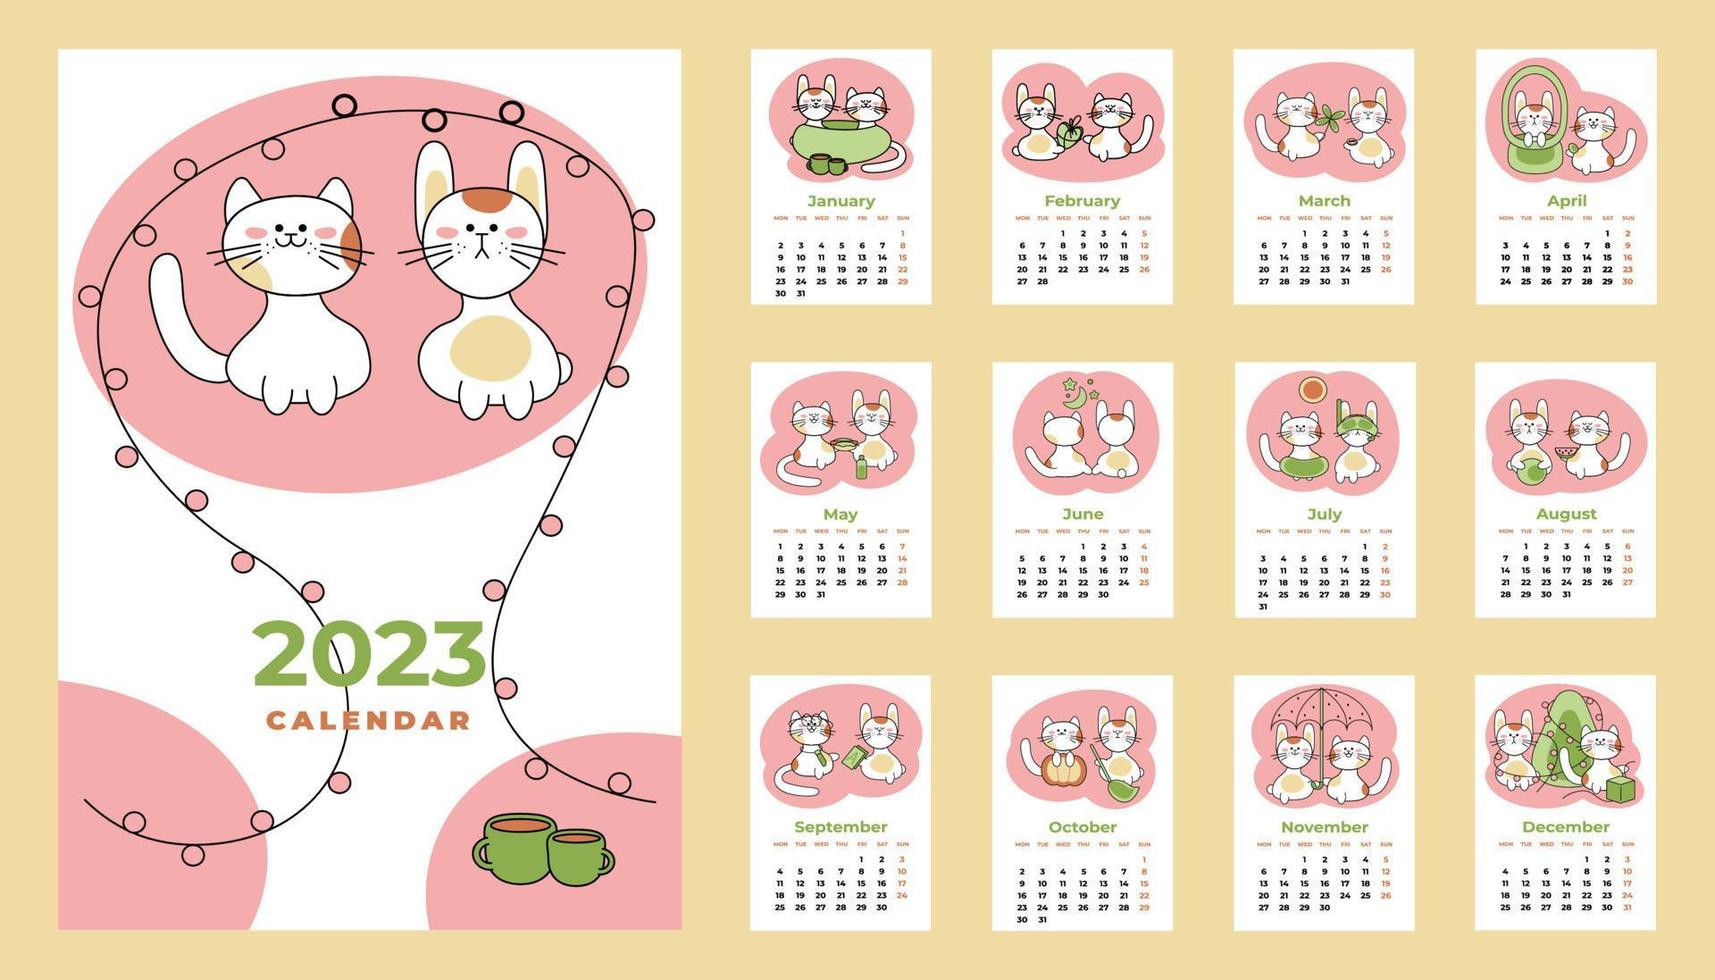 Calendar 2023. Calendar sheets with all months including cover in English. Cartoon vector illustration.